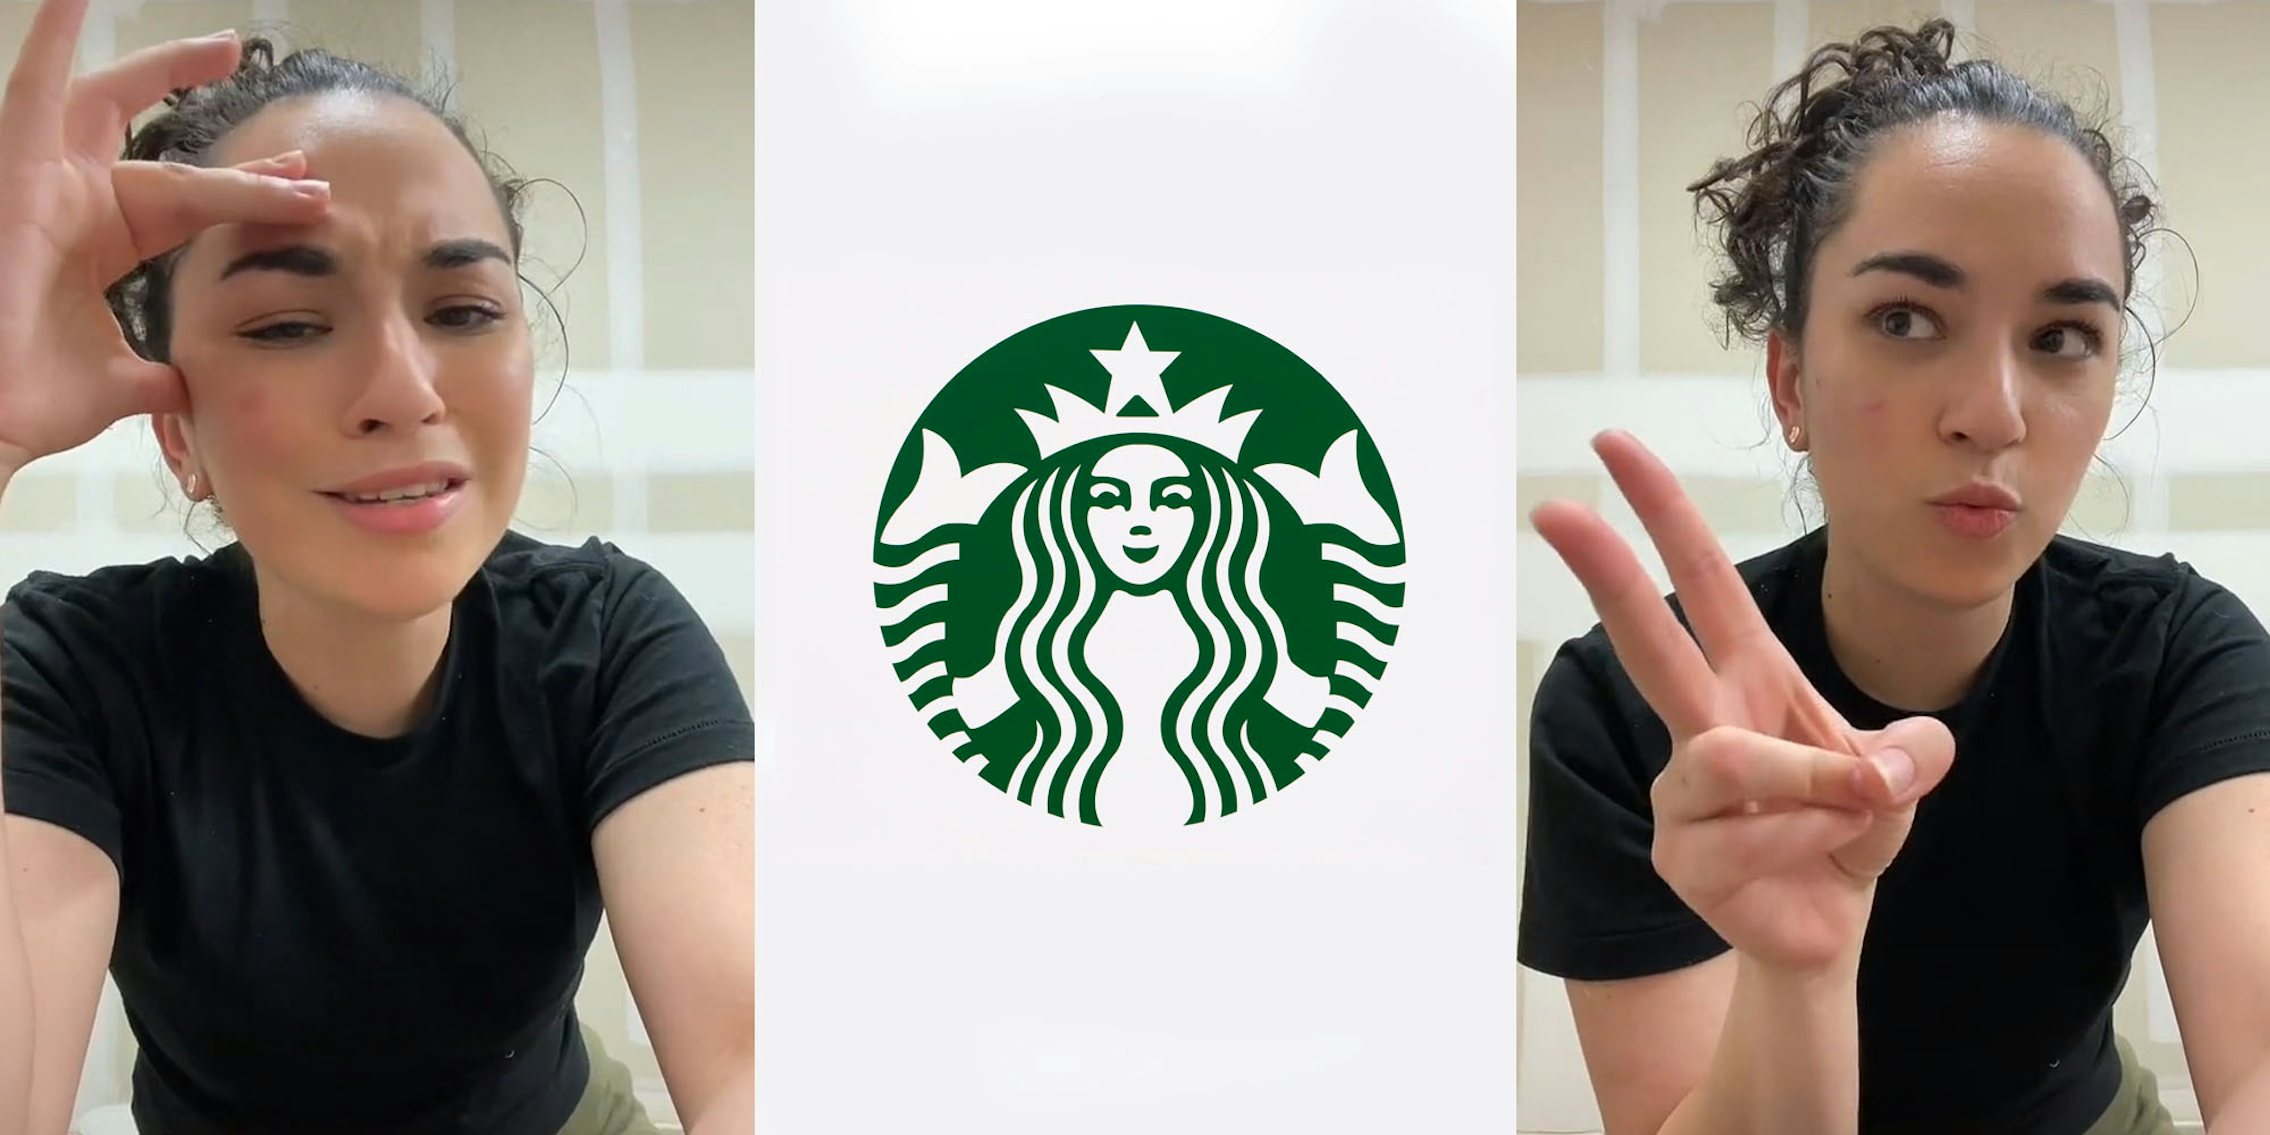 woman speaking hand on forehead (l) starbucks logo on white background (c) woman holding to fingers up speaking (r)